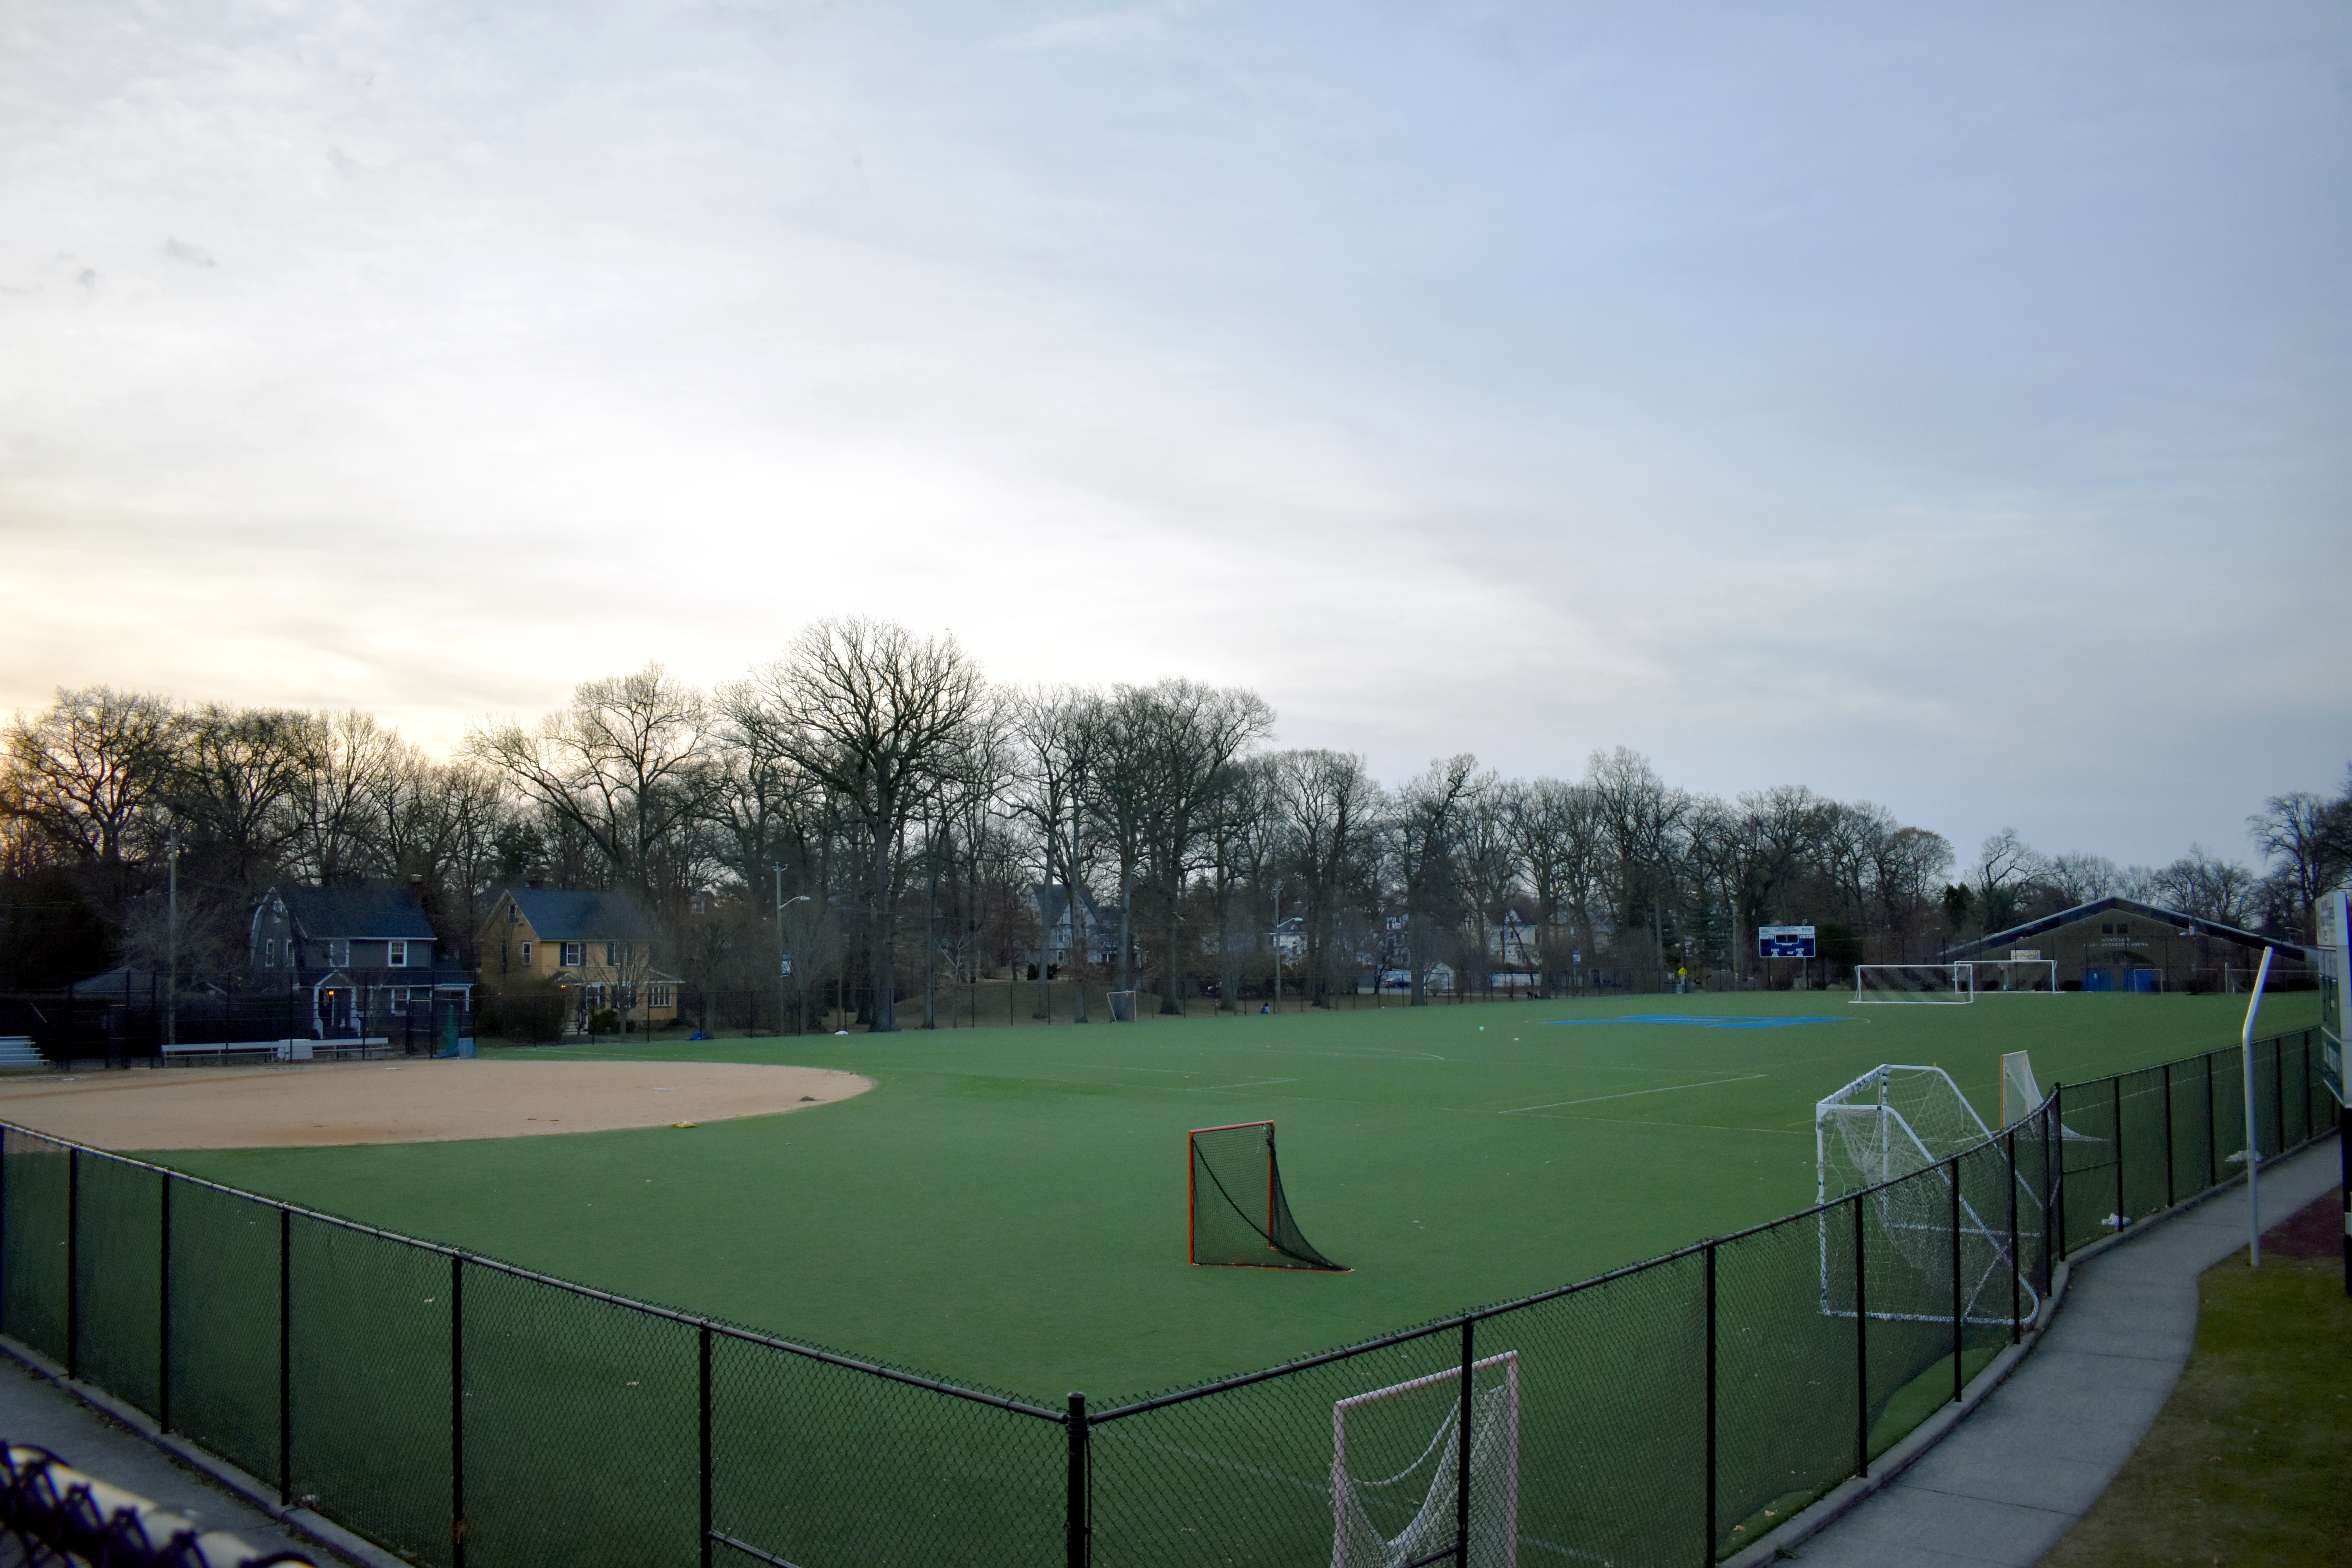 Montclair Athletics: District proceeding carefully on turf replacement